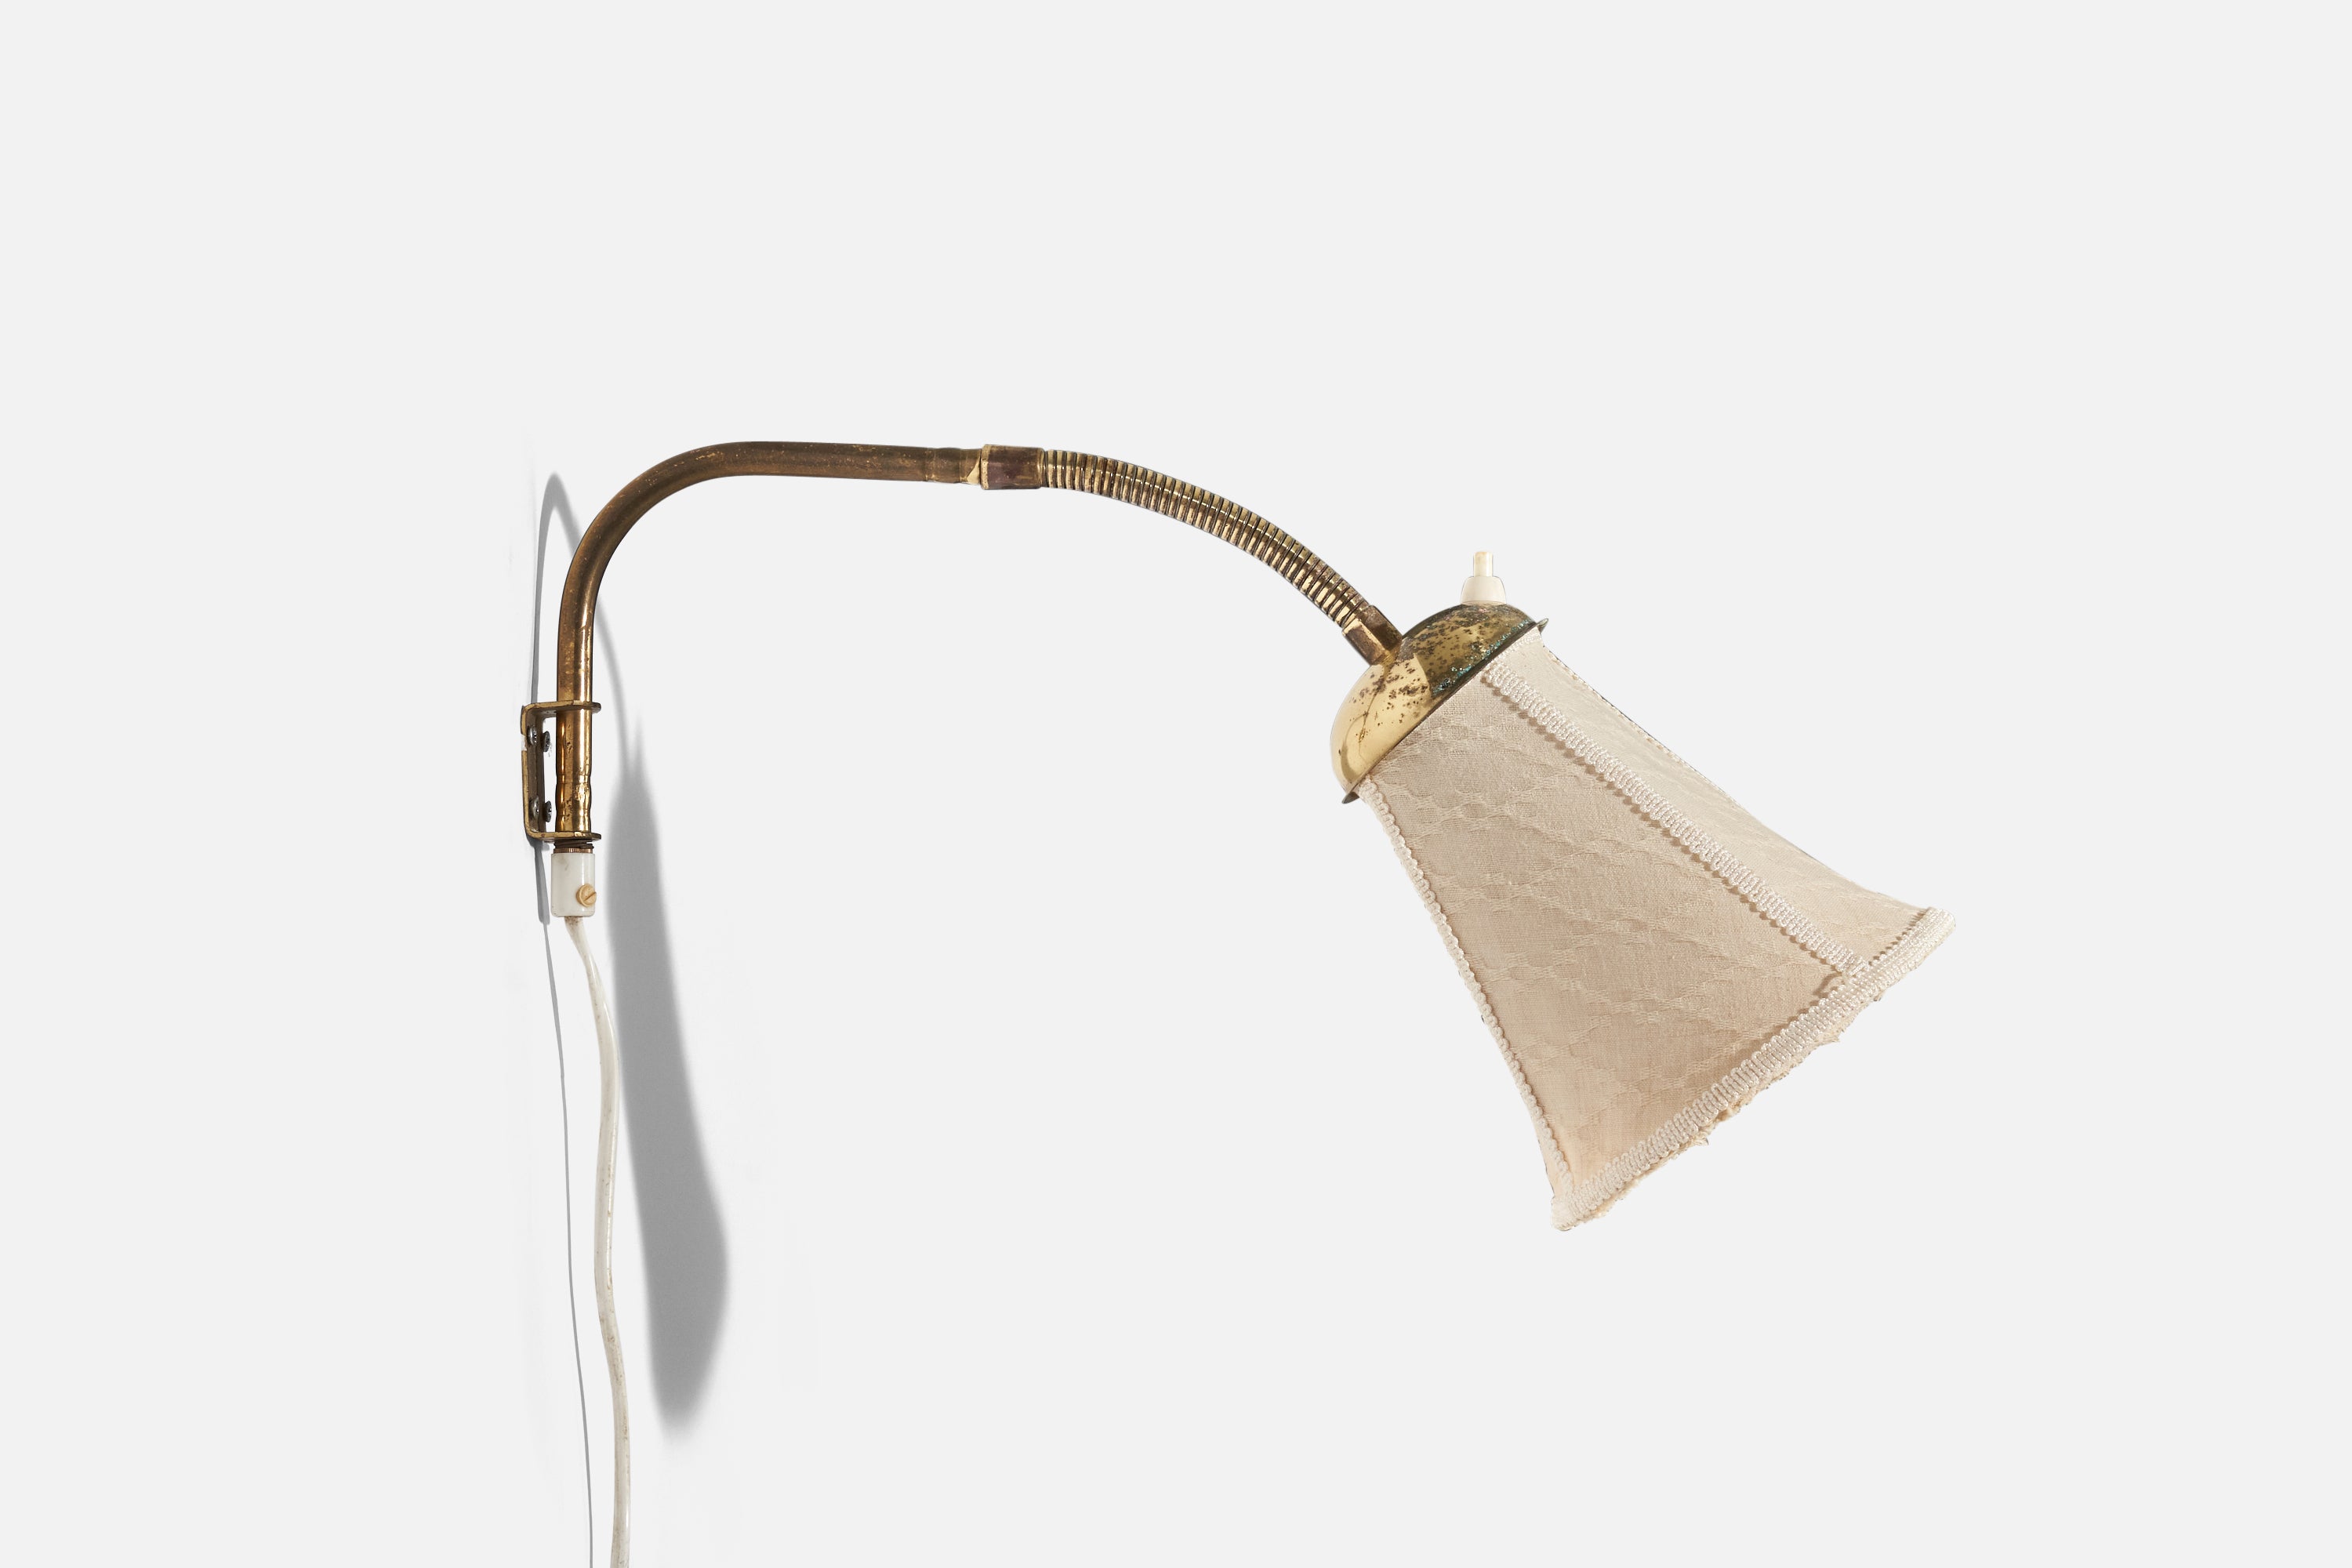 A brass and fabric wall light designed and produced in Sweden, c. 1940s.

Variable dimensions, measured as illustrated in the first image. 

Dimensions of back plate (inches) : (1.75 x 1.37 x .87).